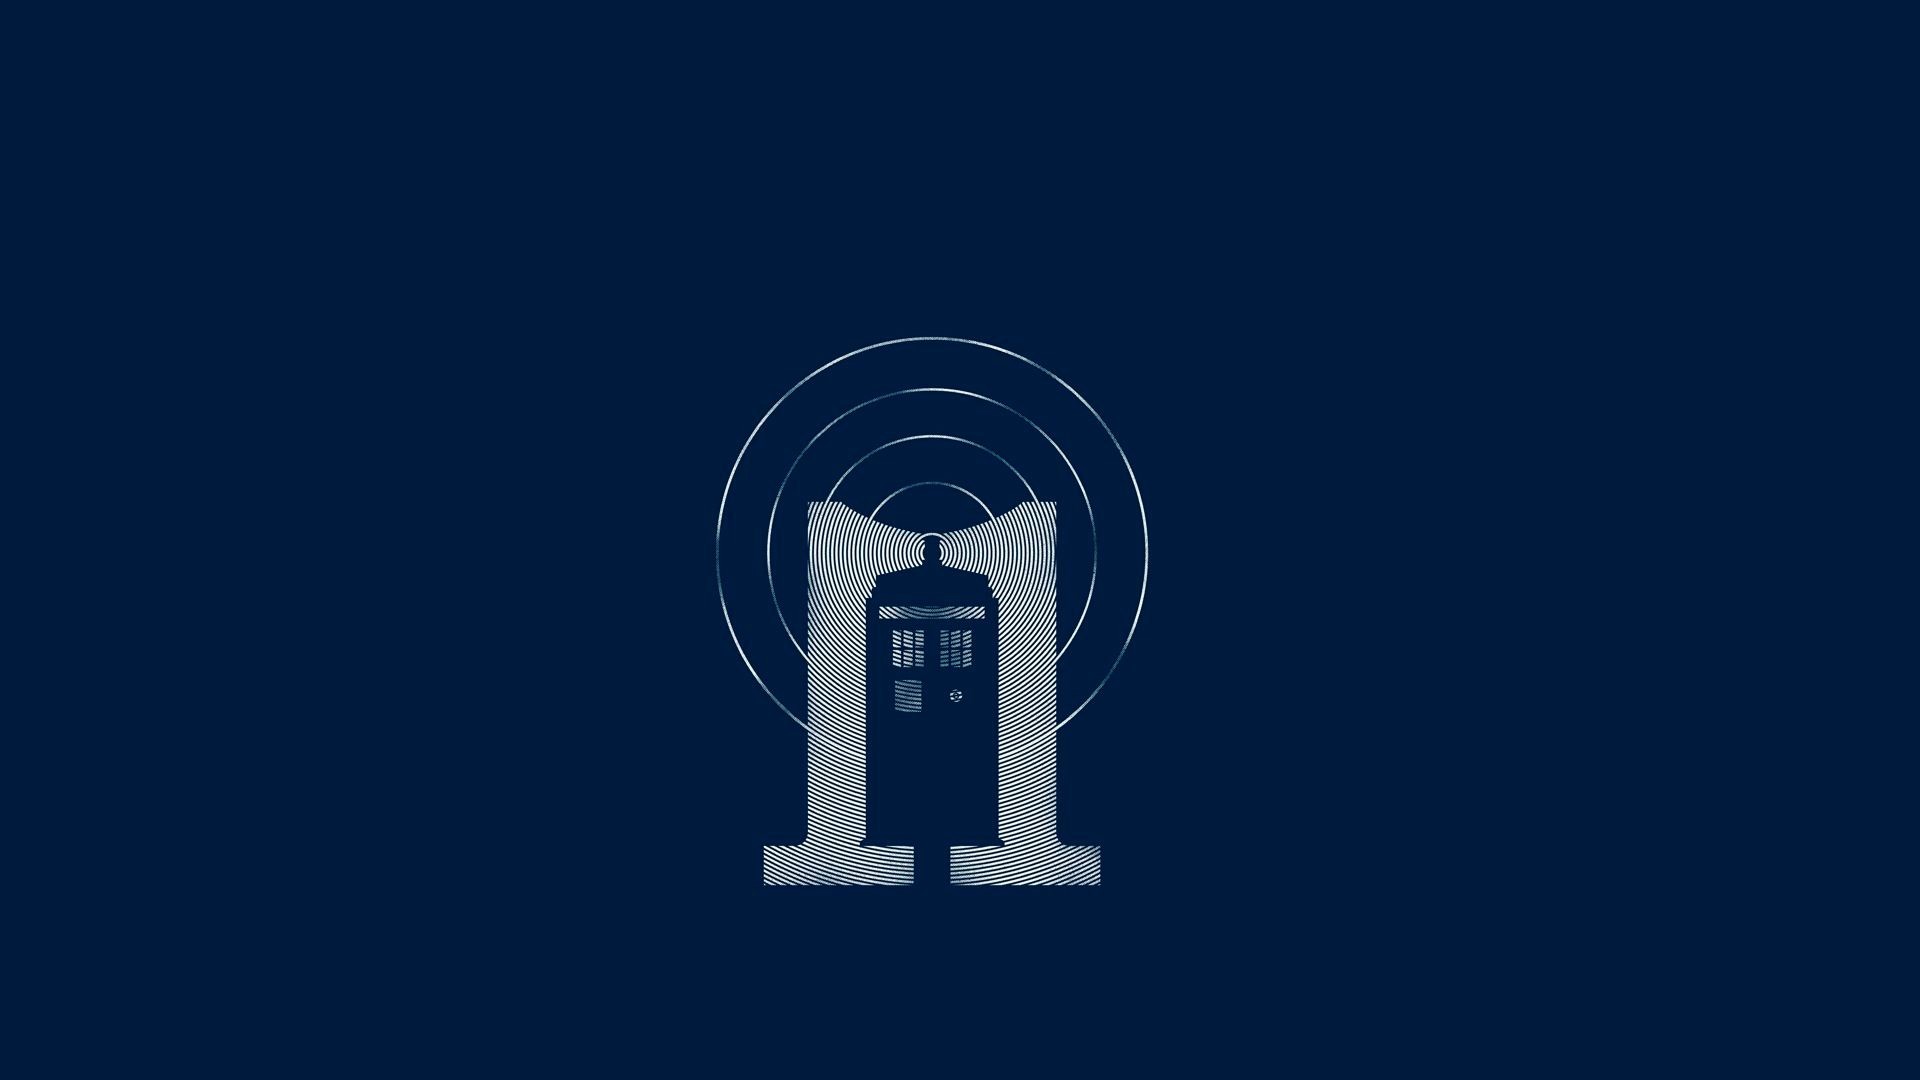 Px Free download doctor who wallpaper by Dudu Walls for – pocketfullofgrace.com